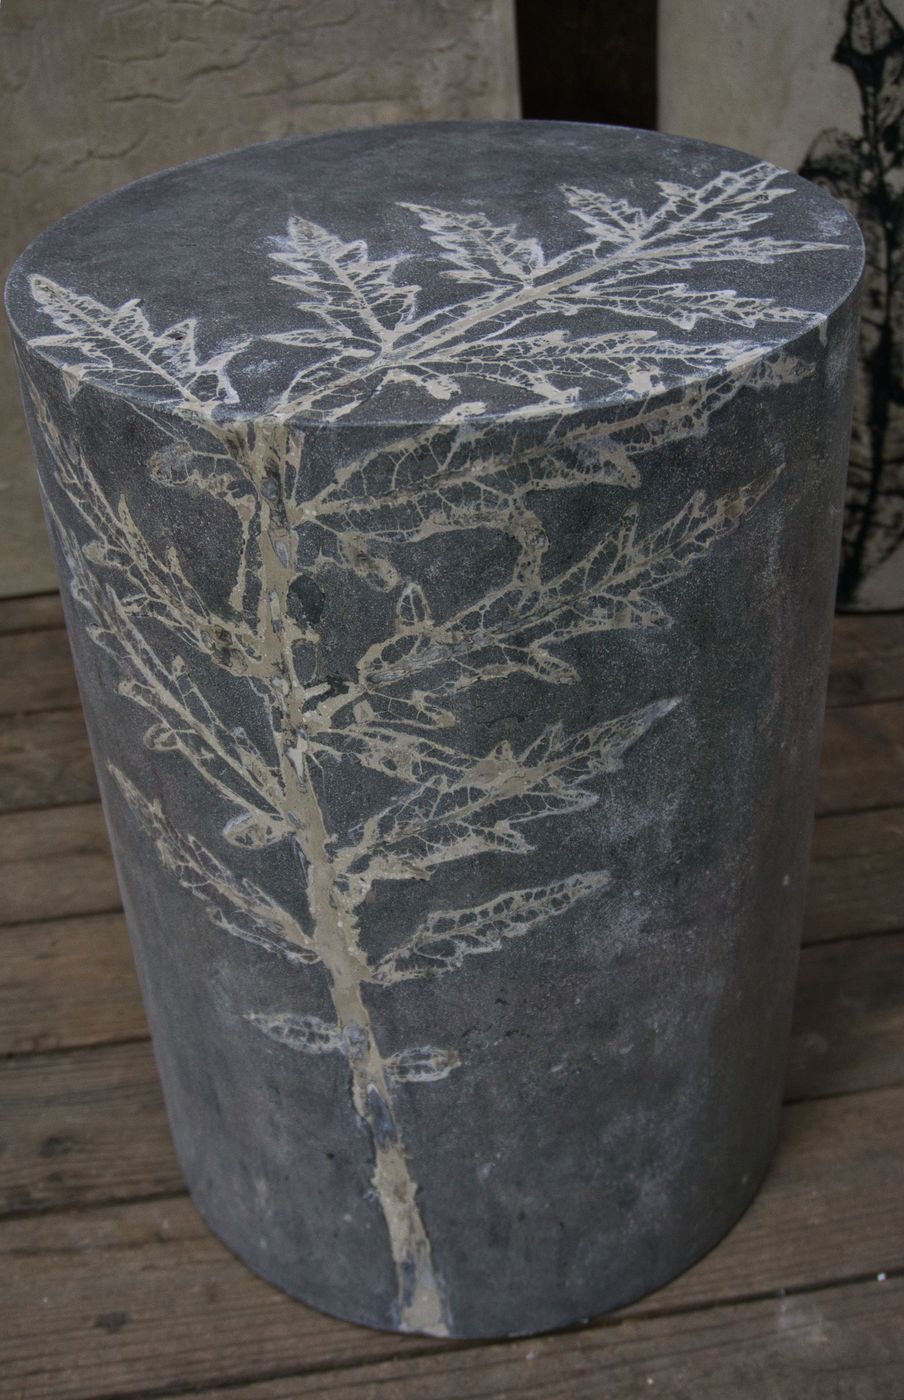 Grey Concrete Stool with Artichoke Leaf design on top and sides